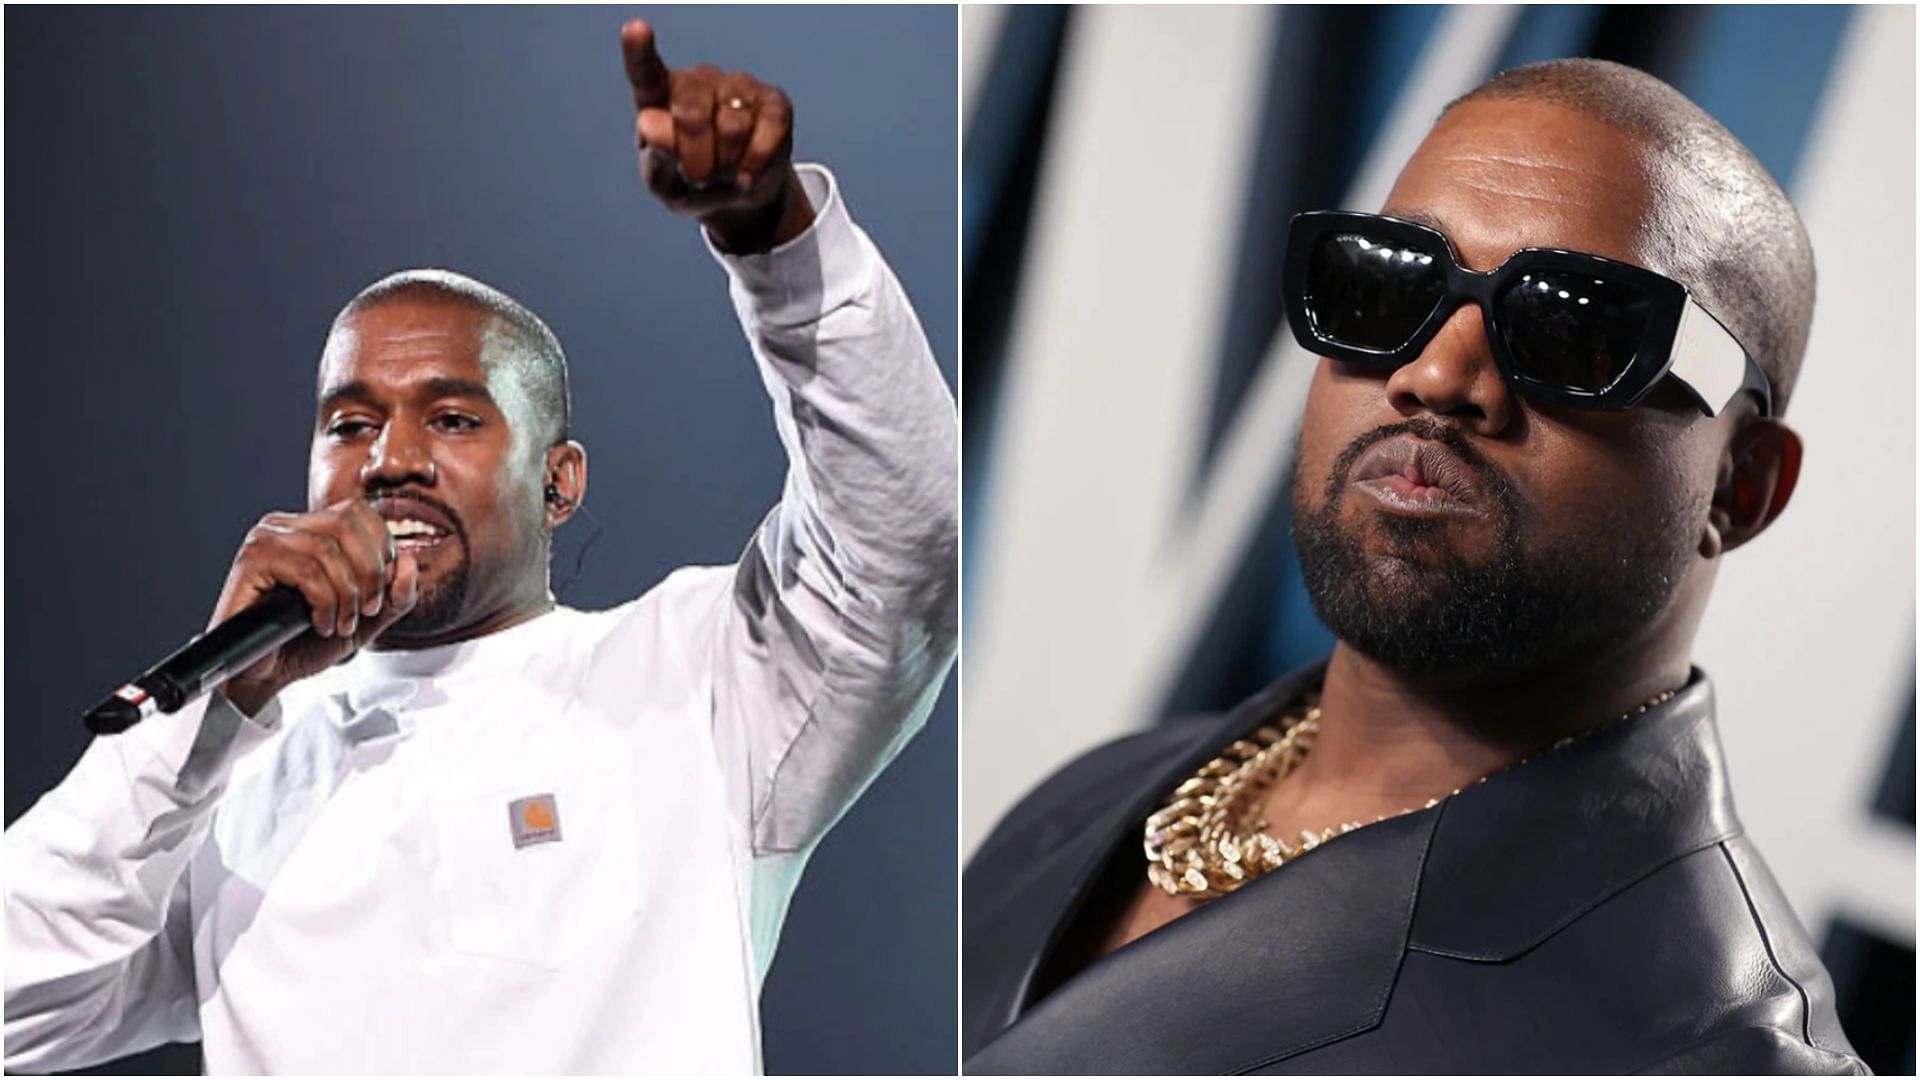 Kanye has terminated his deal with Gap. (Images via Getty)